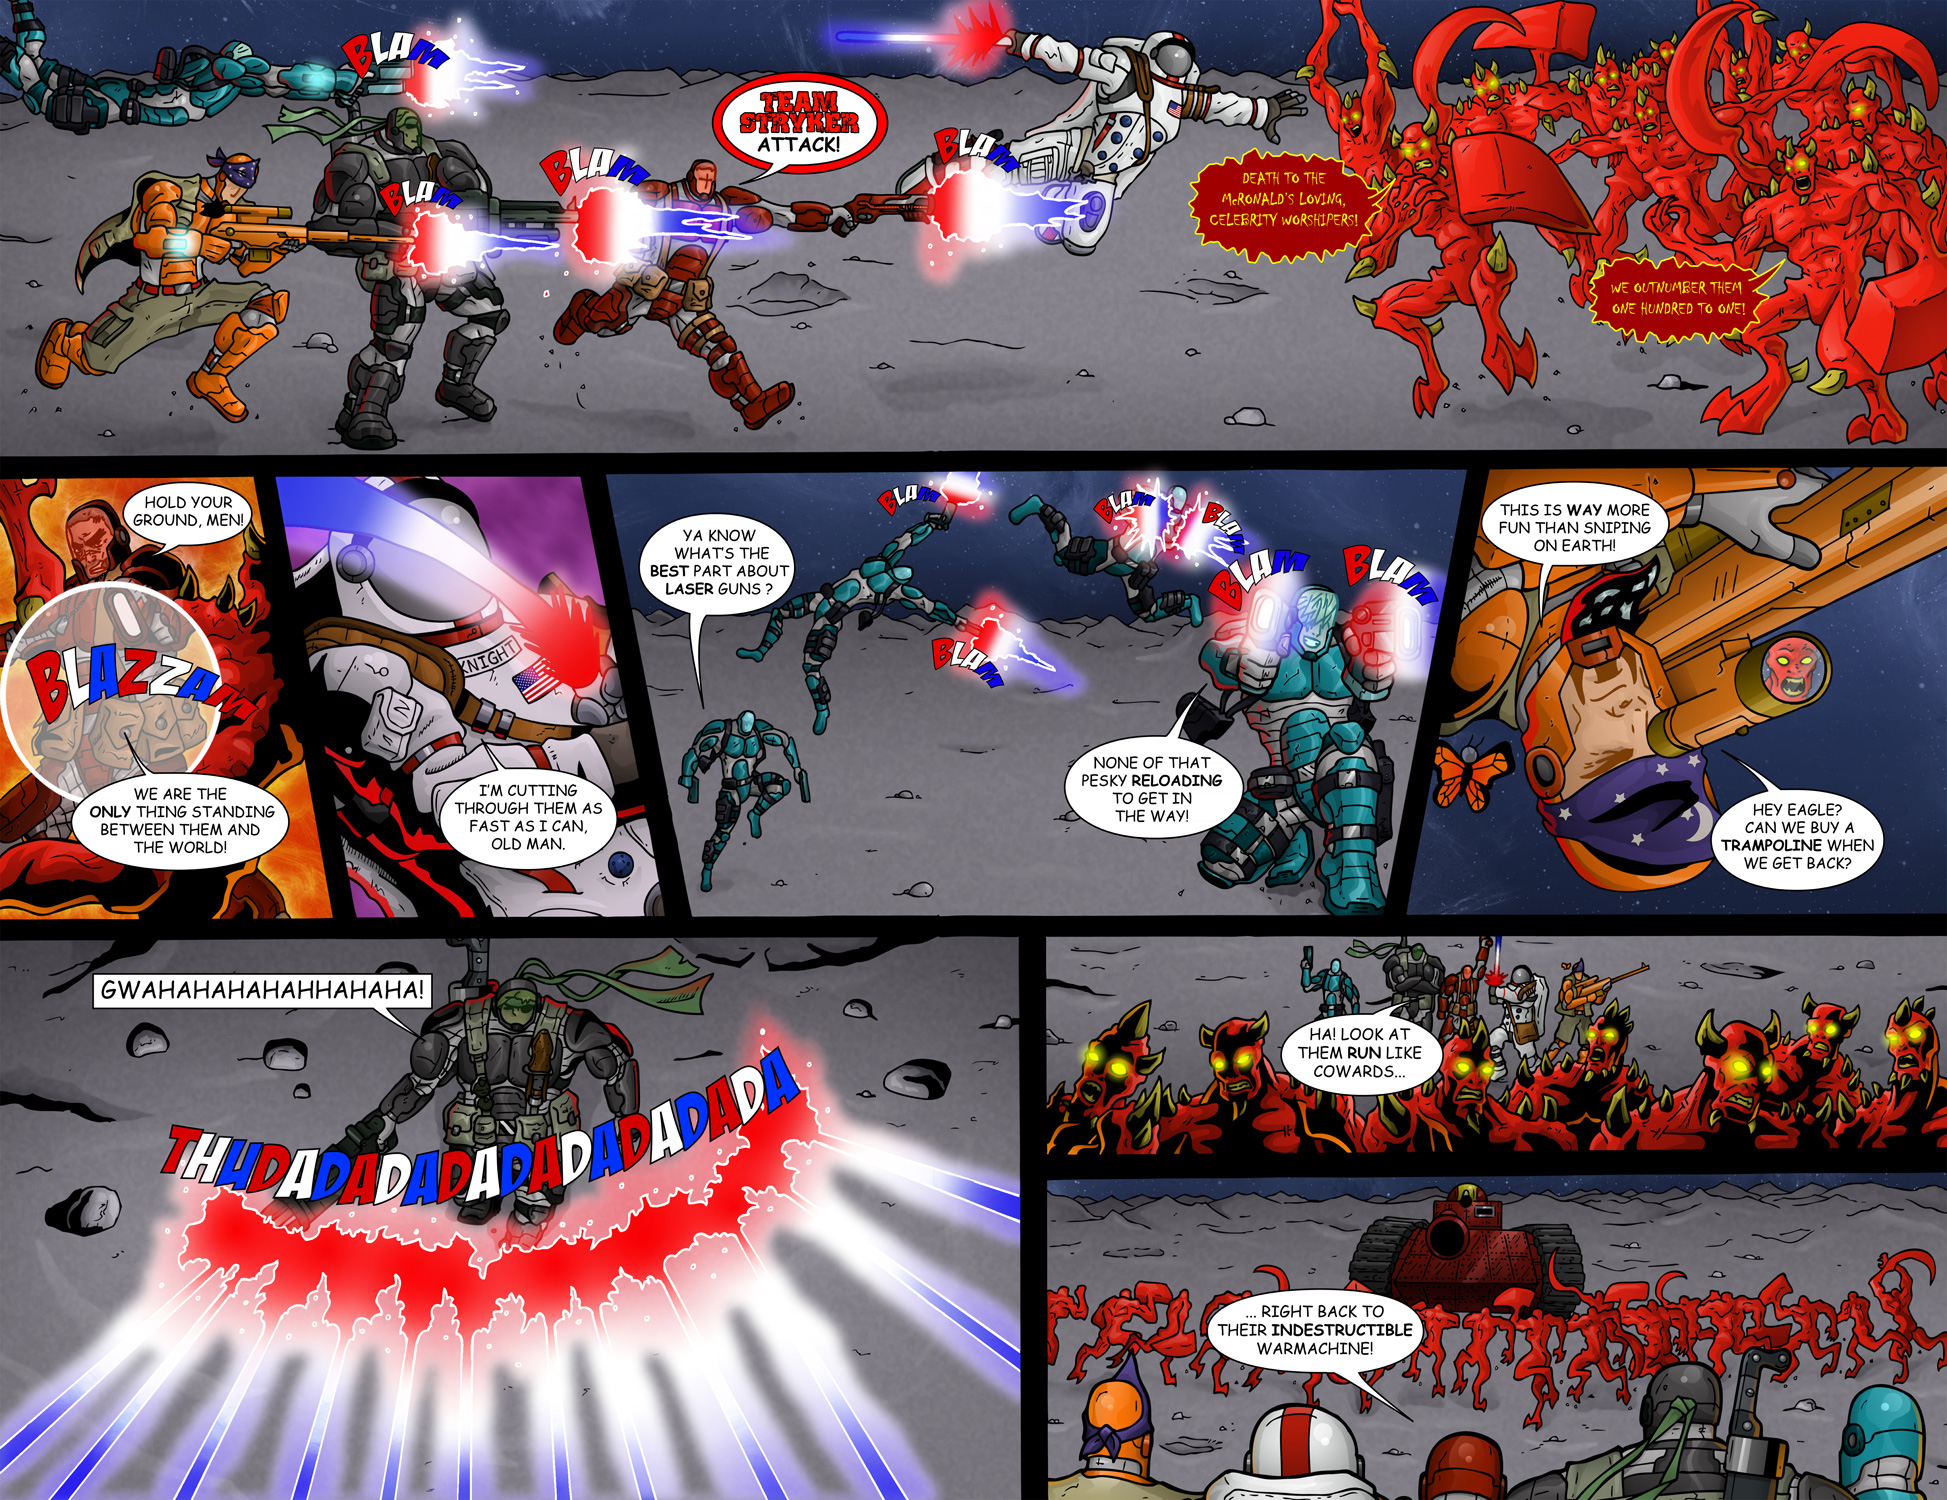 MISSION 007: PAGE 19-20 “McRONALD’S LOVING CELEBRITY WORSHIPERS!”